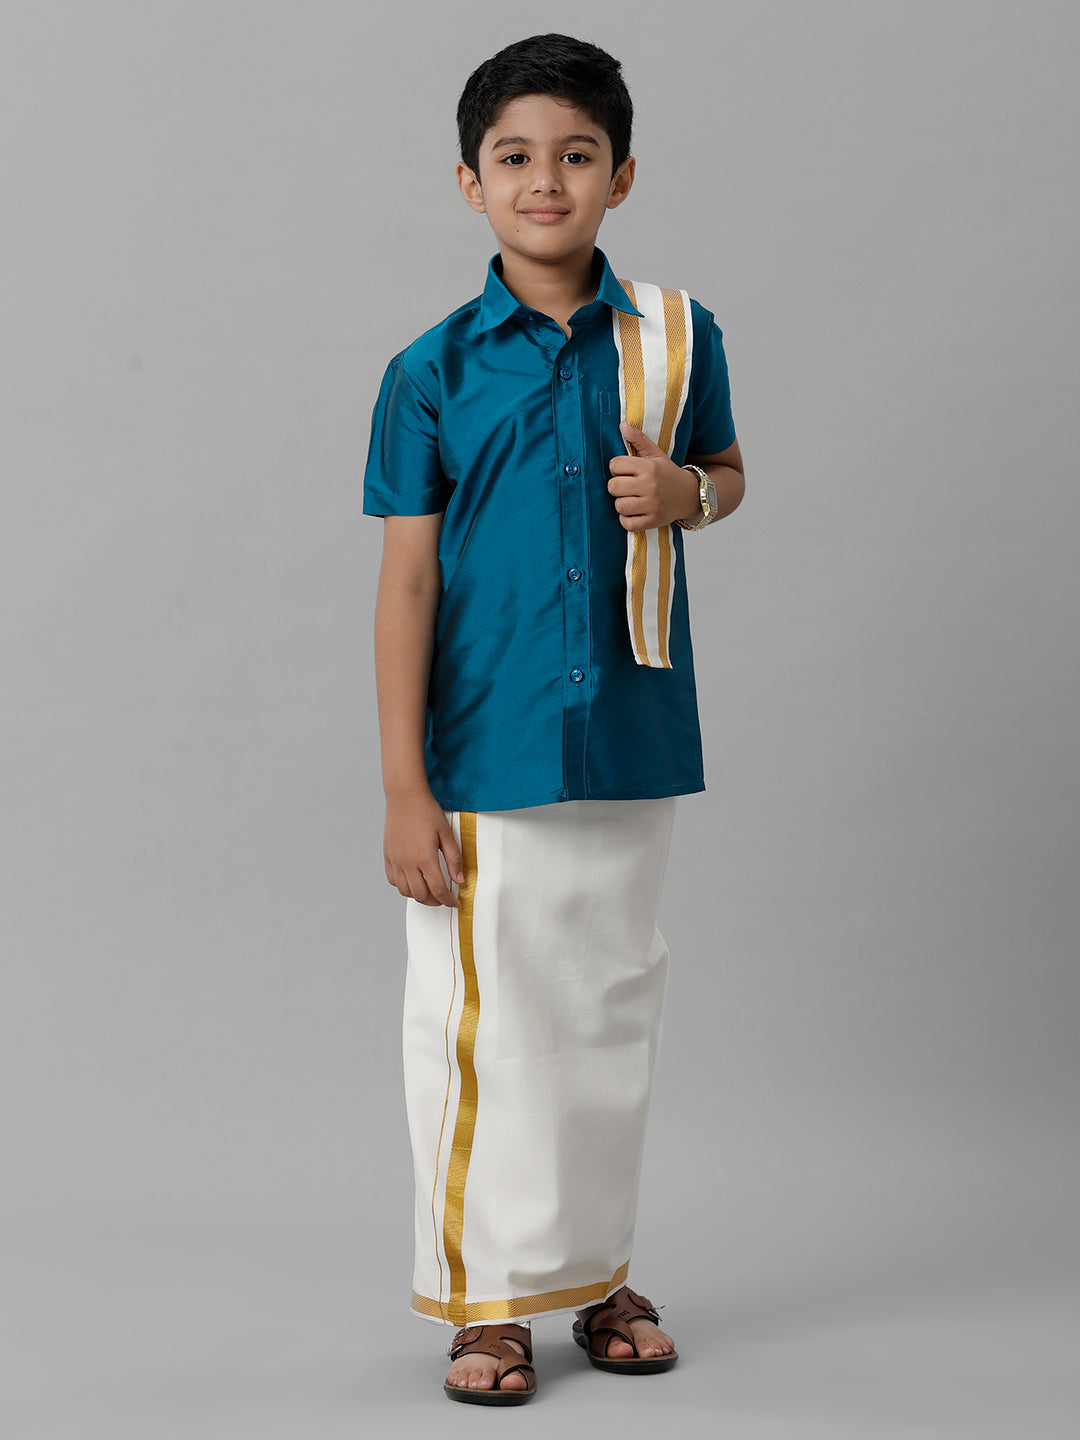 Boys Silk Cotton Blue Half Sleeves Shirt with Adjustable Cream Dhoti Towel Combo K1-Front view